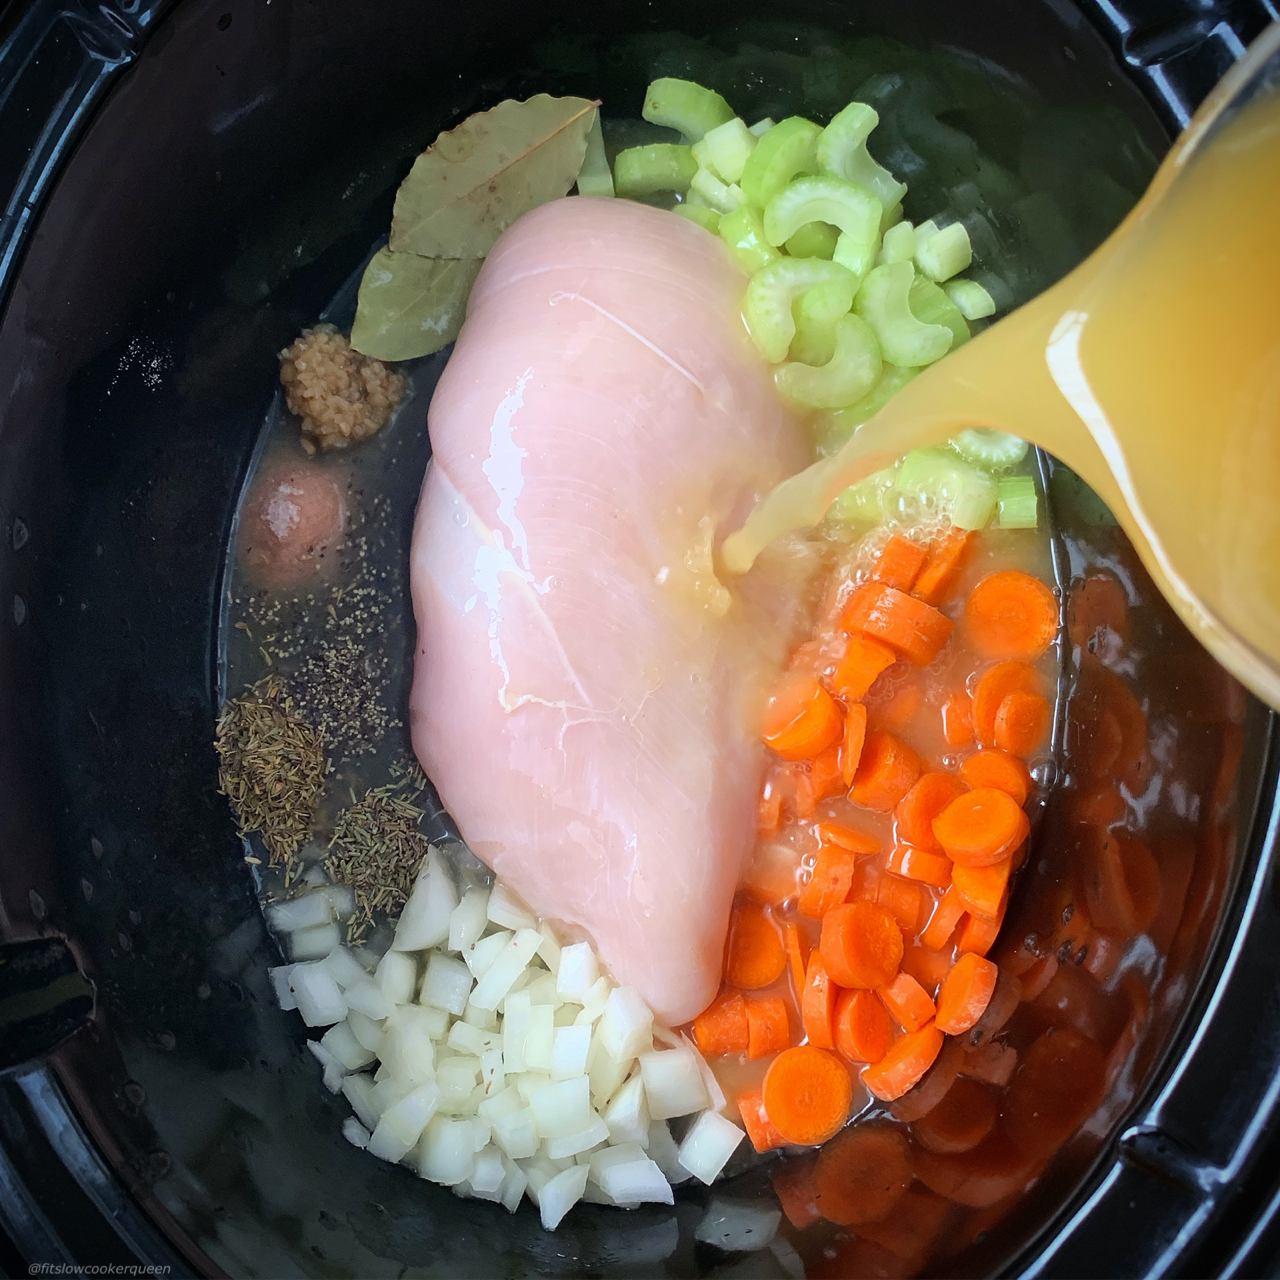 raw chicken, celery, onion, carrots, garlic, bay leaf, and seasonings in the slow cooker with broth being poured in